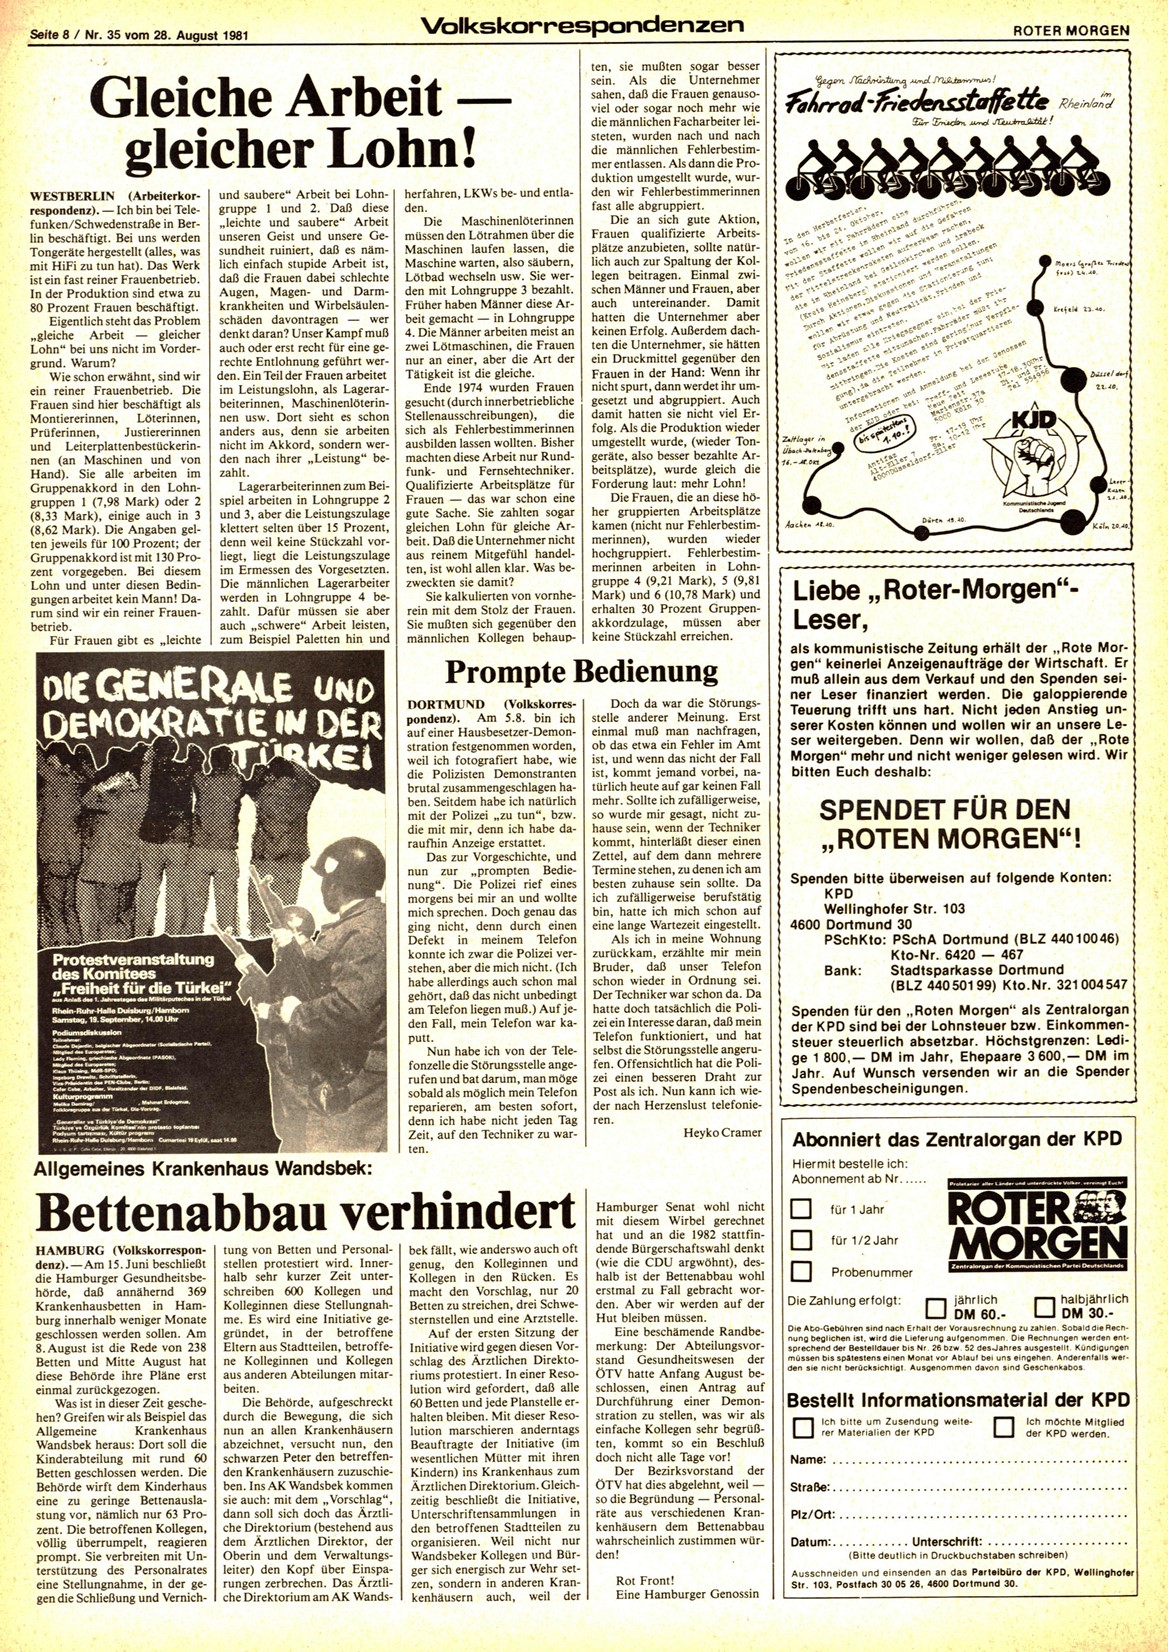 Roter Morgen, 15. Jg., 28. August 1981, Nr. 35, Seite 8